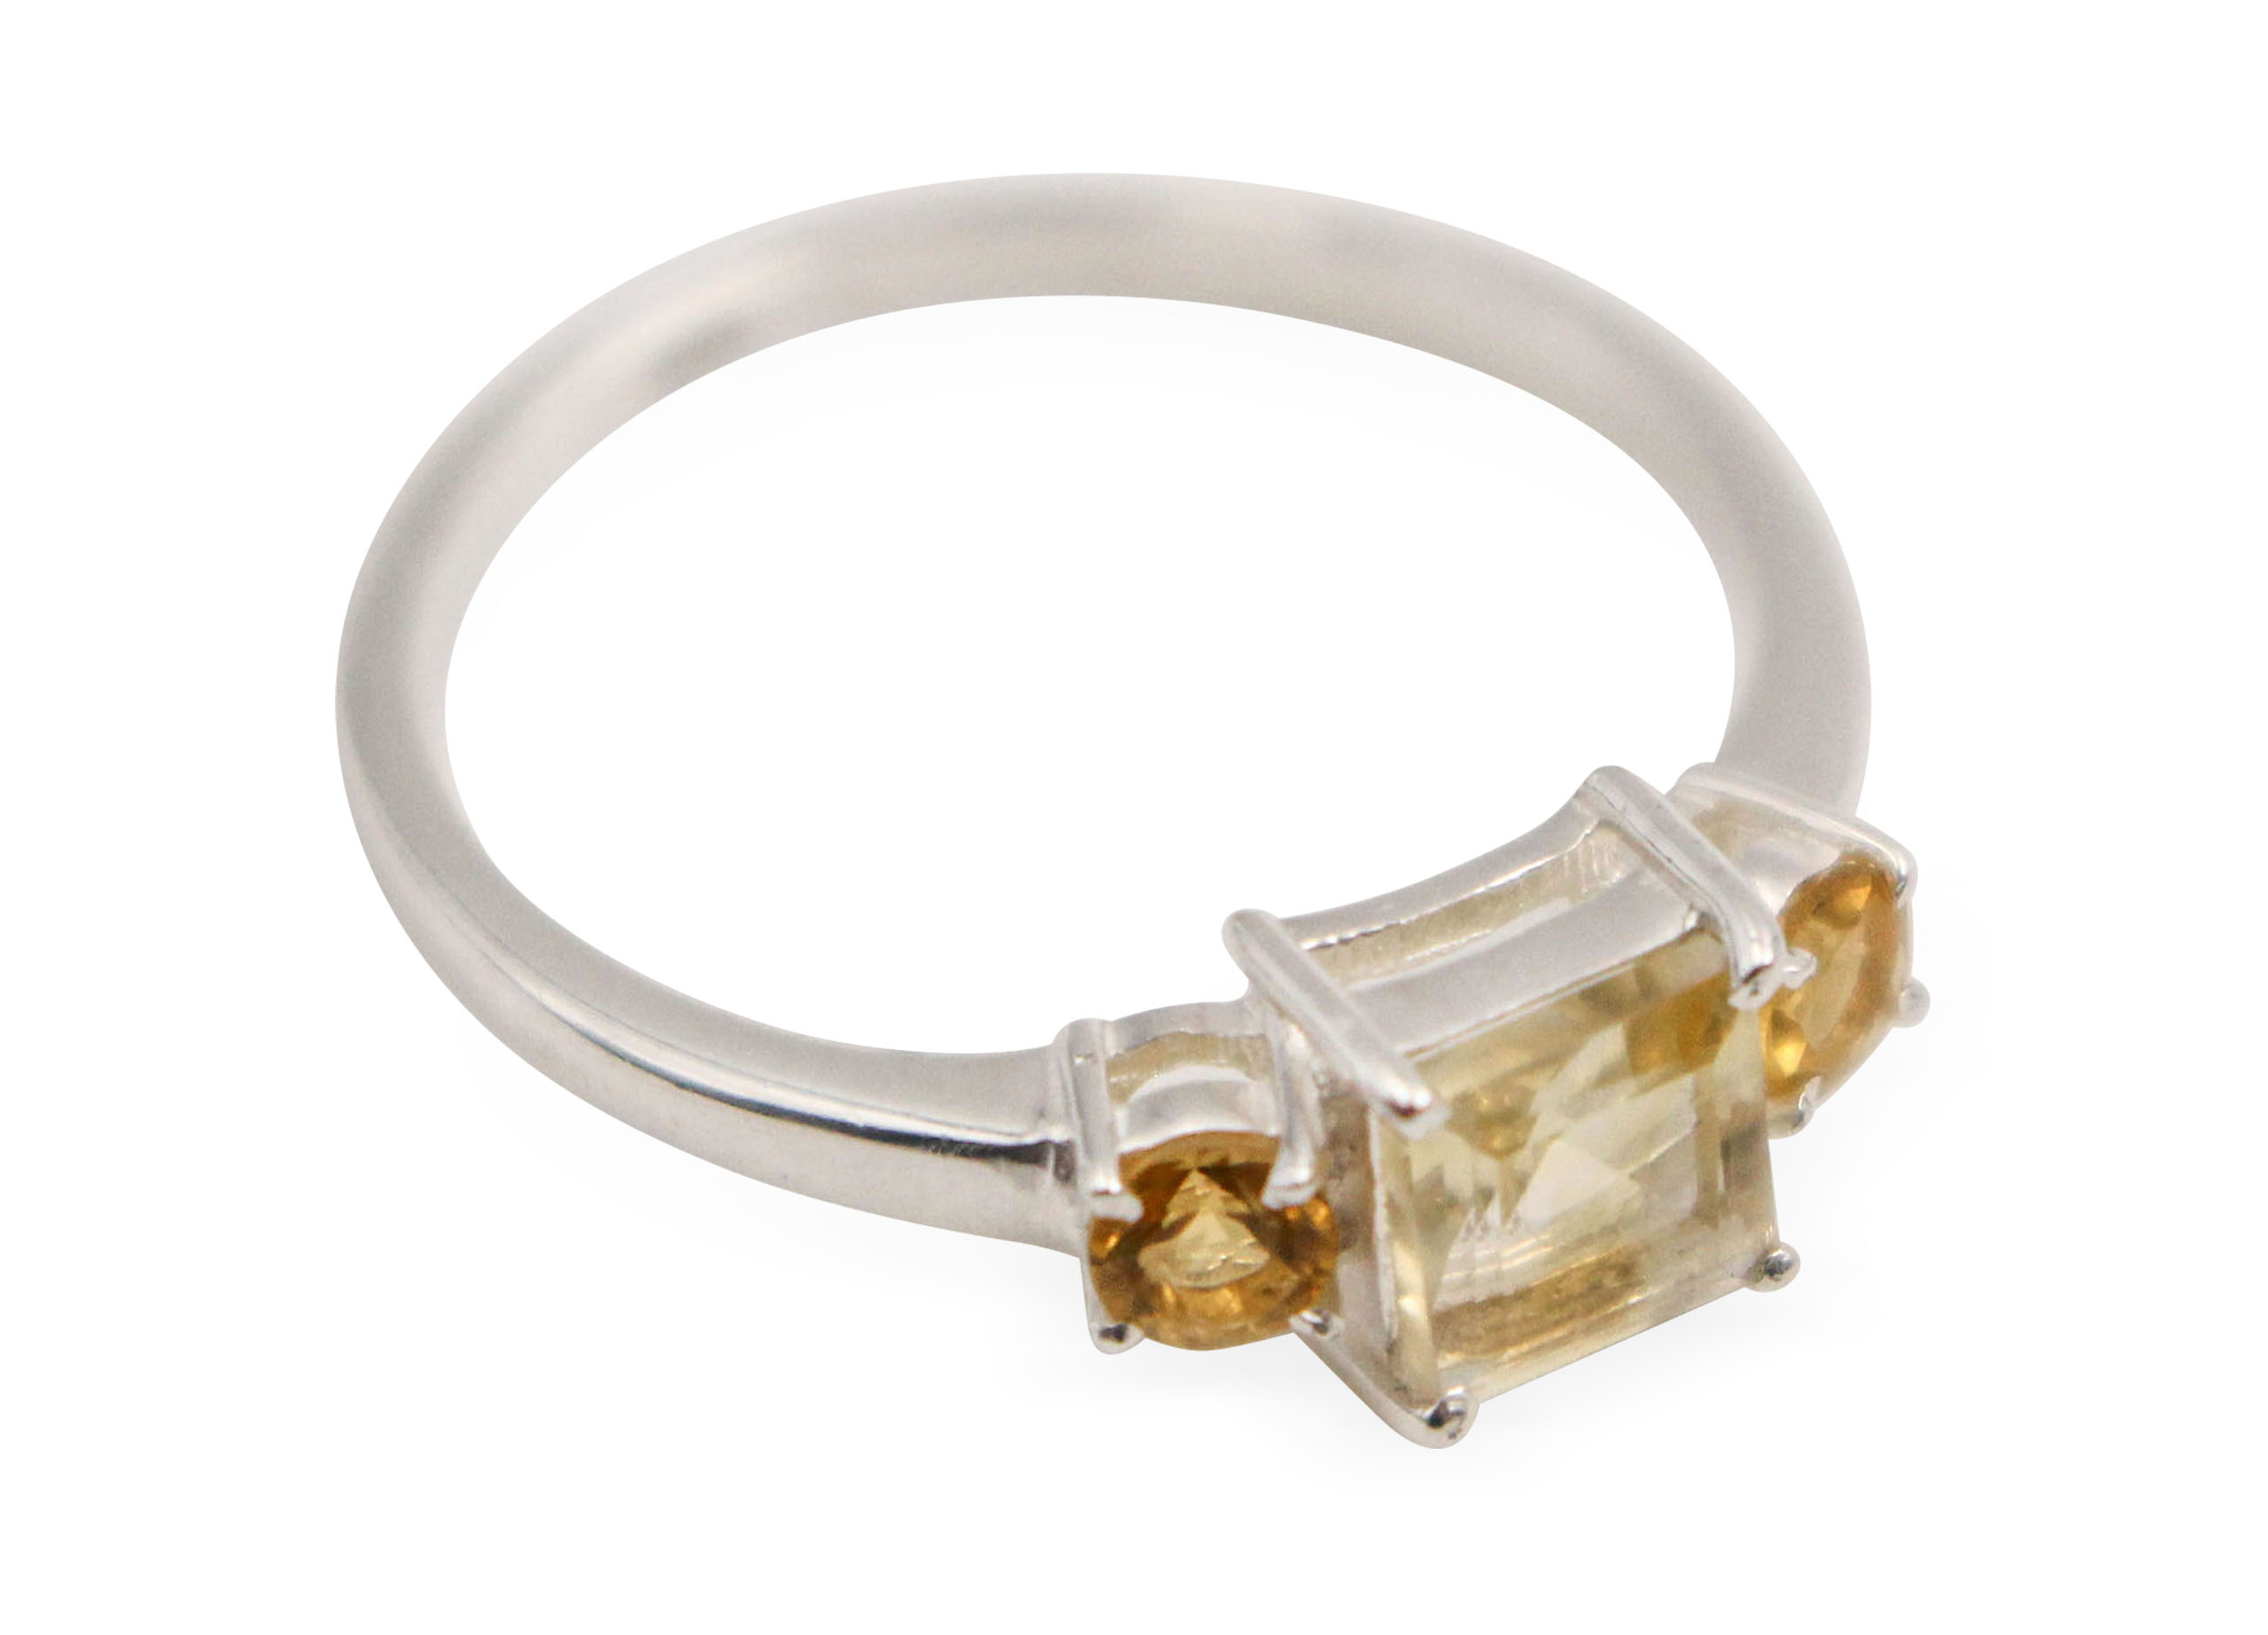 Citrine _Fides_ Sterling Silver Ring - Crystal Dreams